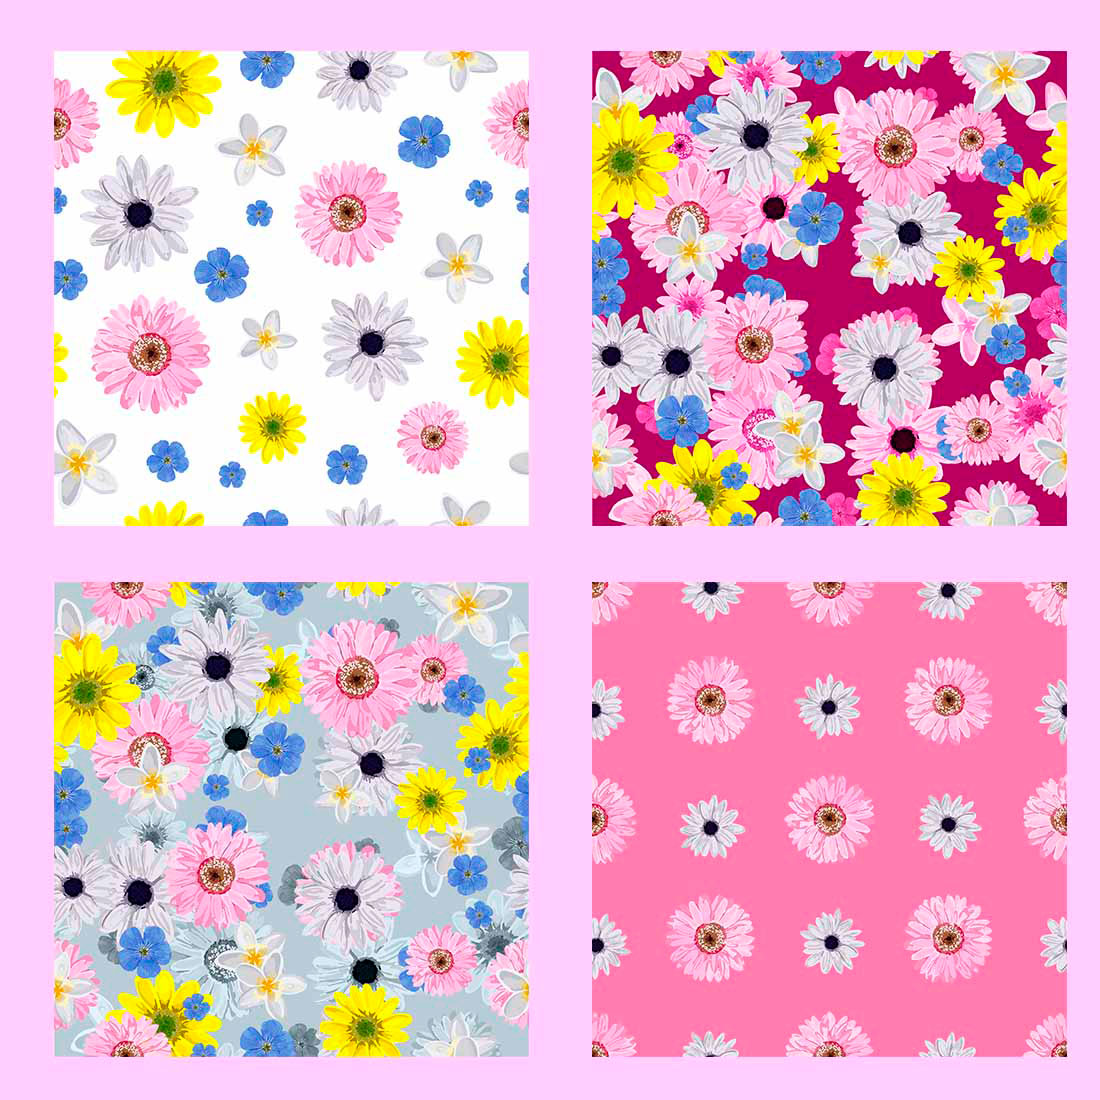 A selection of images of elegant patterns with flowers.